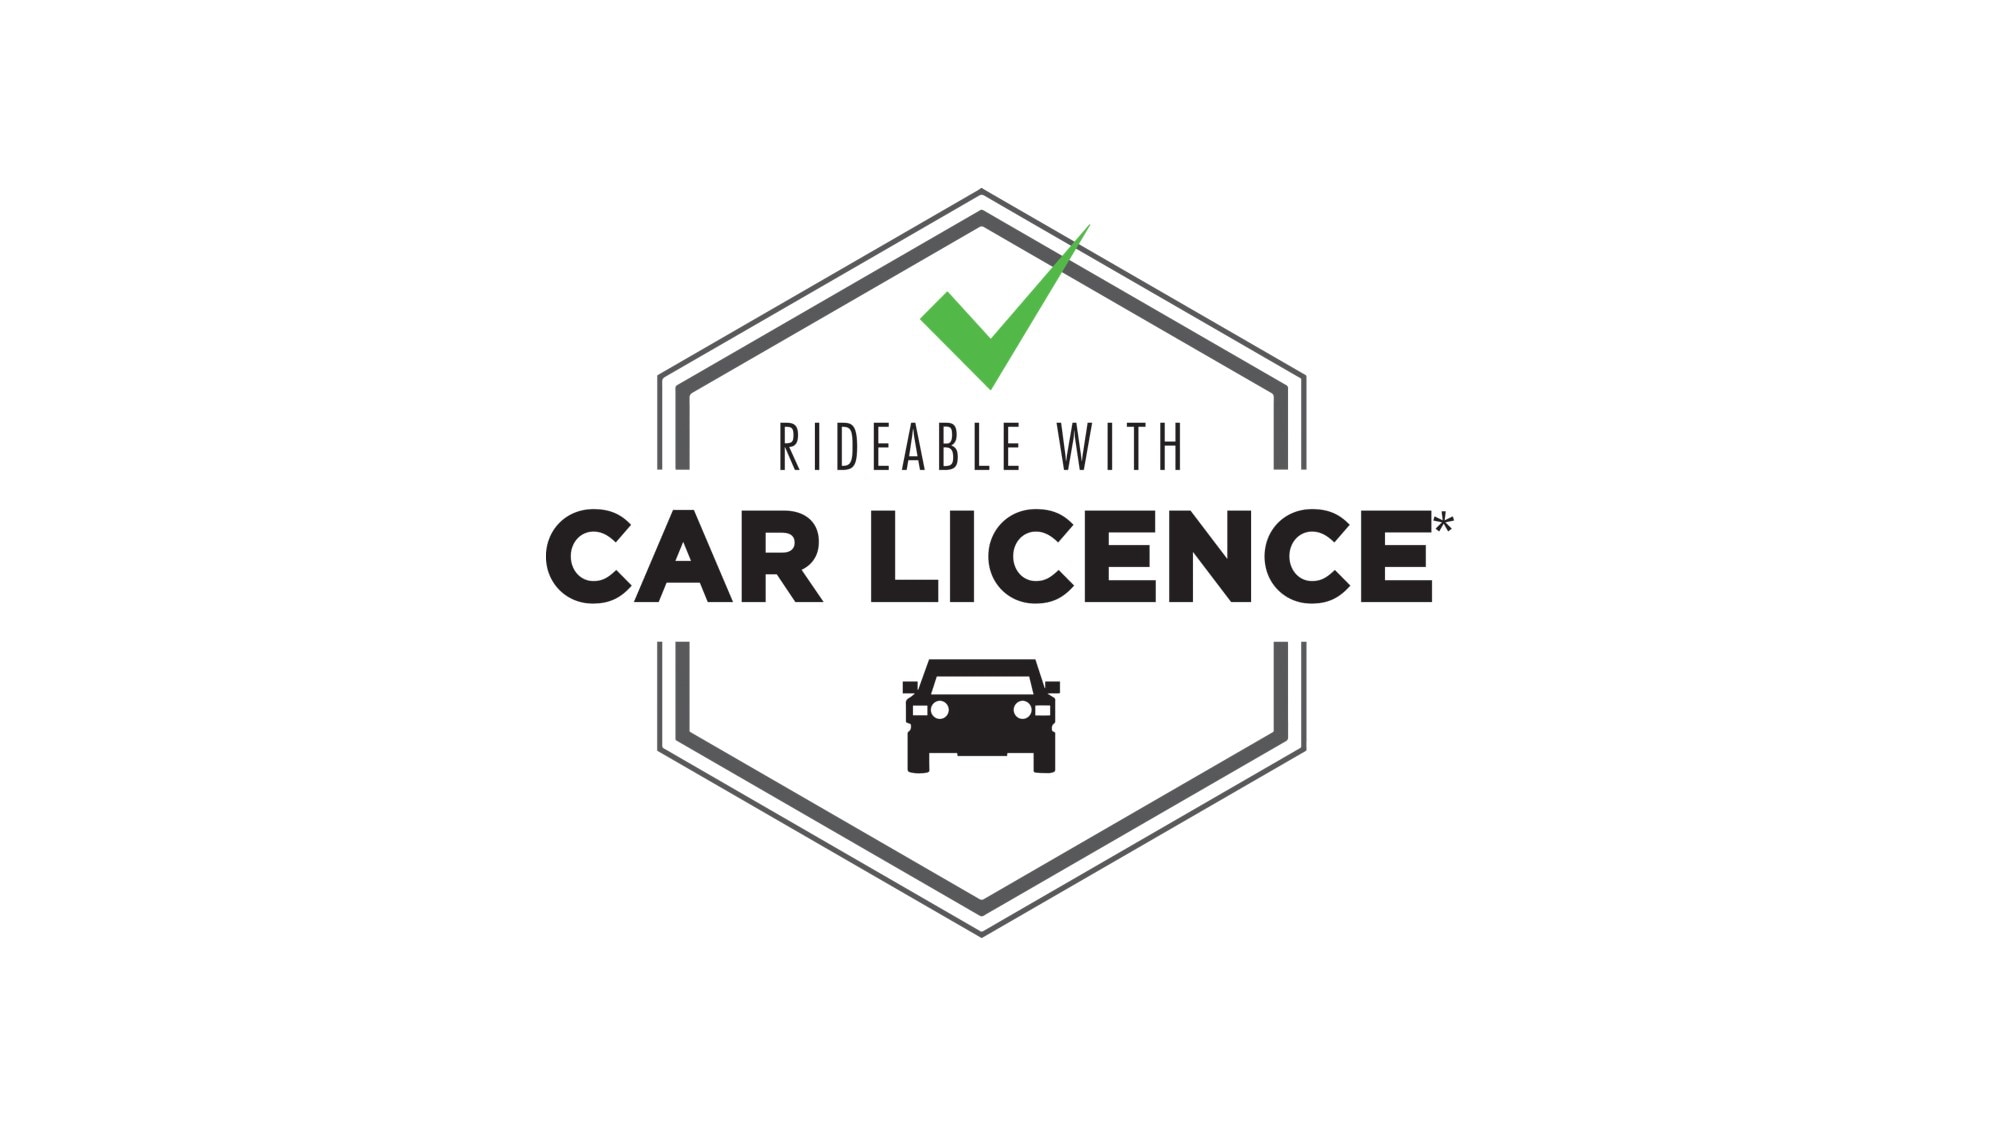 Can-Am rideable with car licence